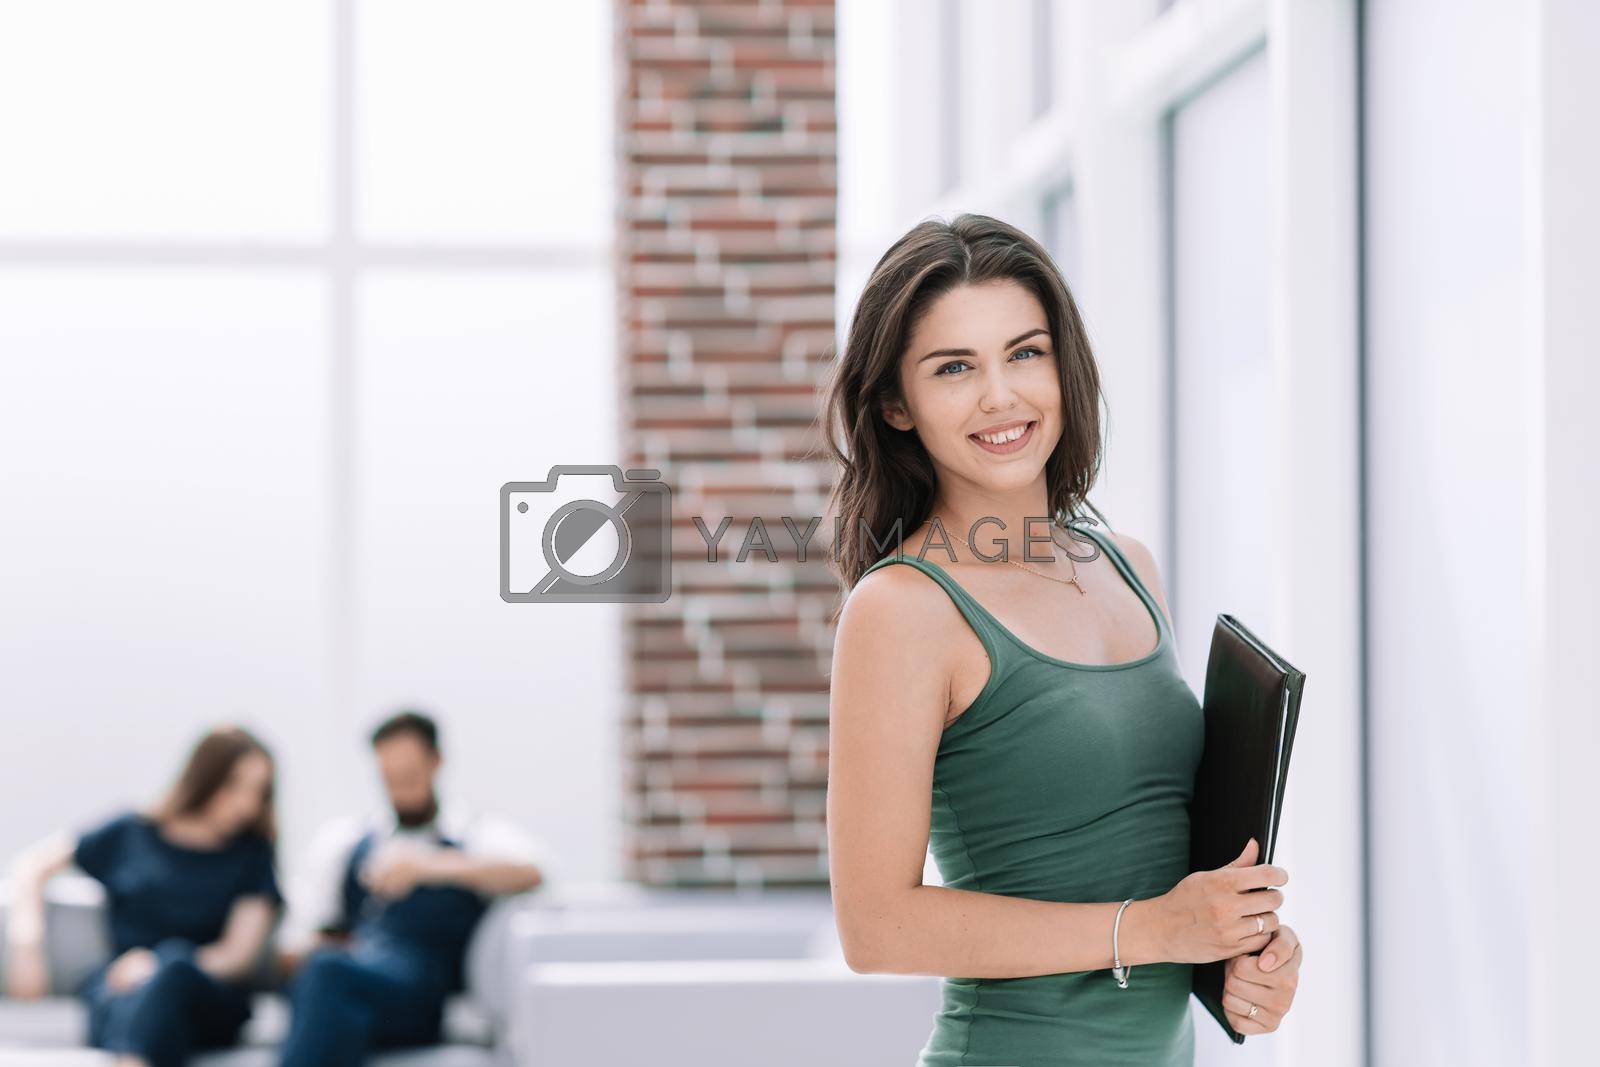 Royalty free image of young business woman with clipboard standing in office lobby by SmartPhotoLab